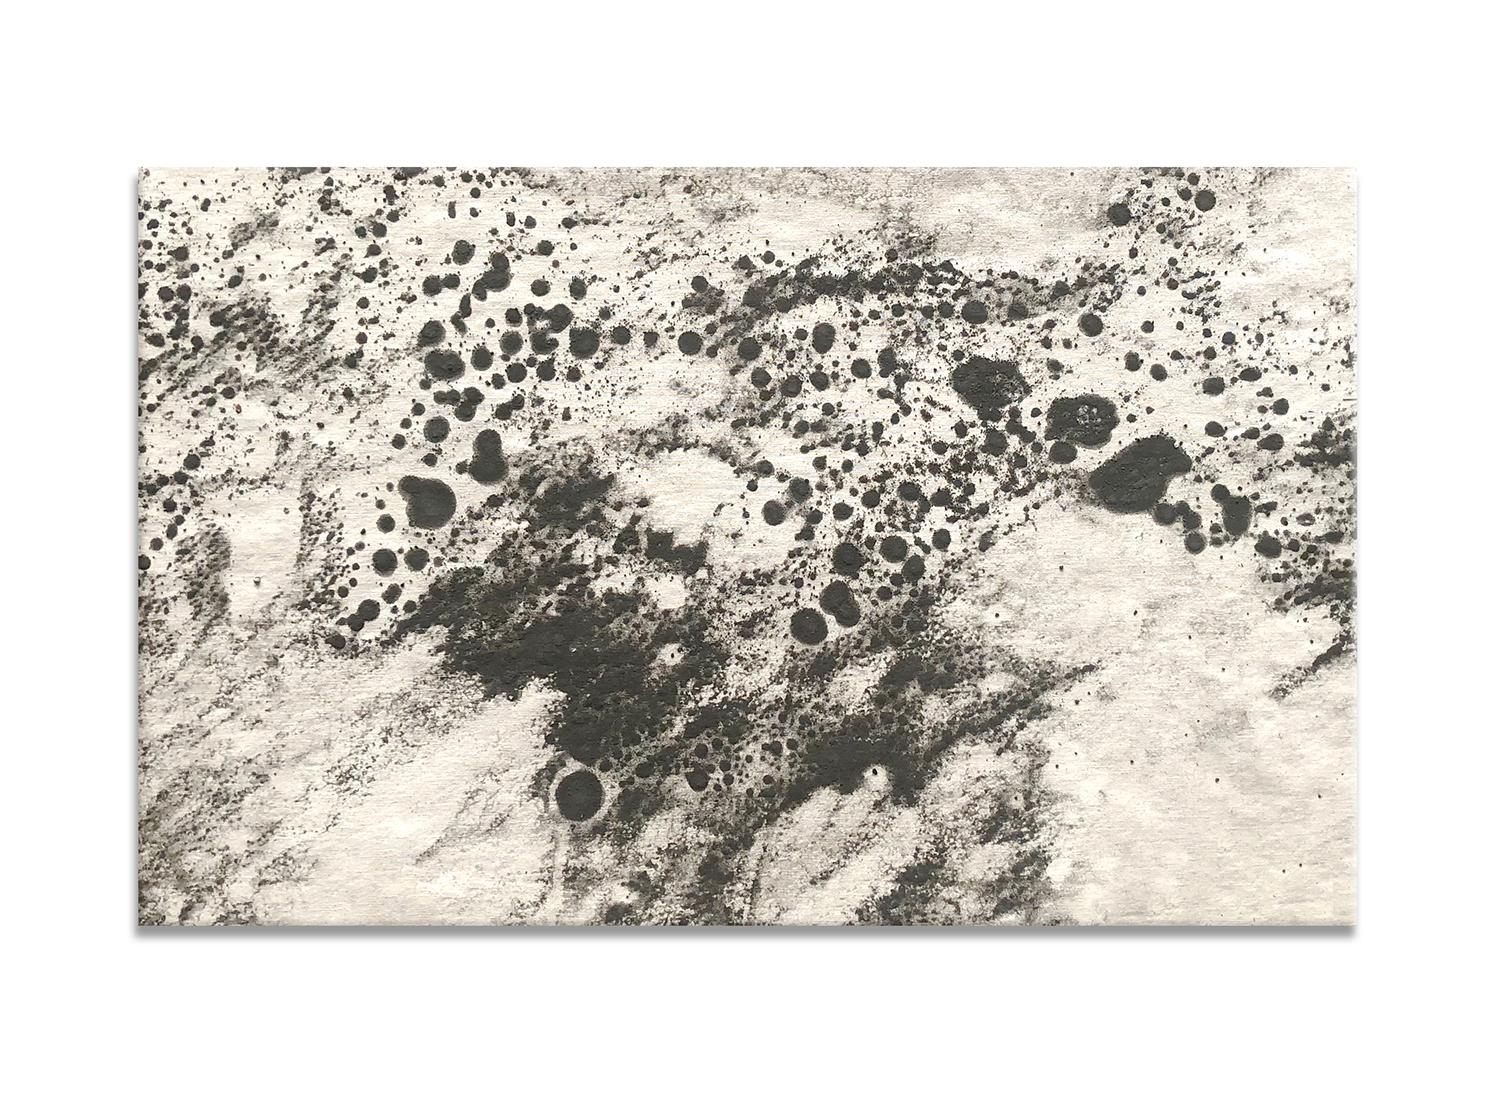 Kurtis Brand Abstract Painting - Ash Ceniza #11, (black and white, ashes, abstract expressionist, charcoal)